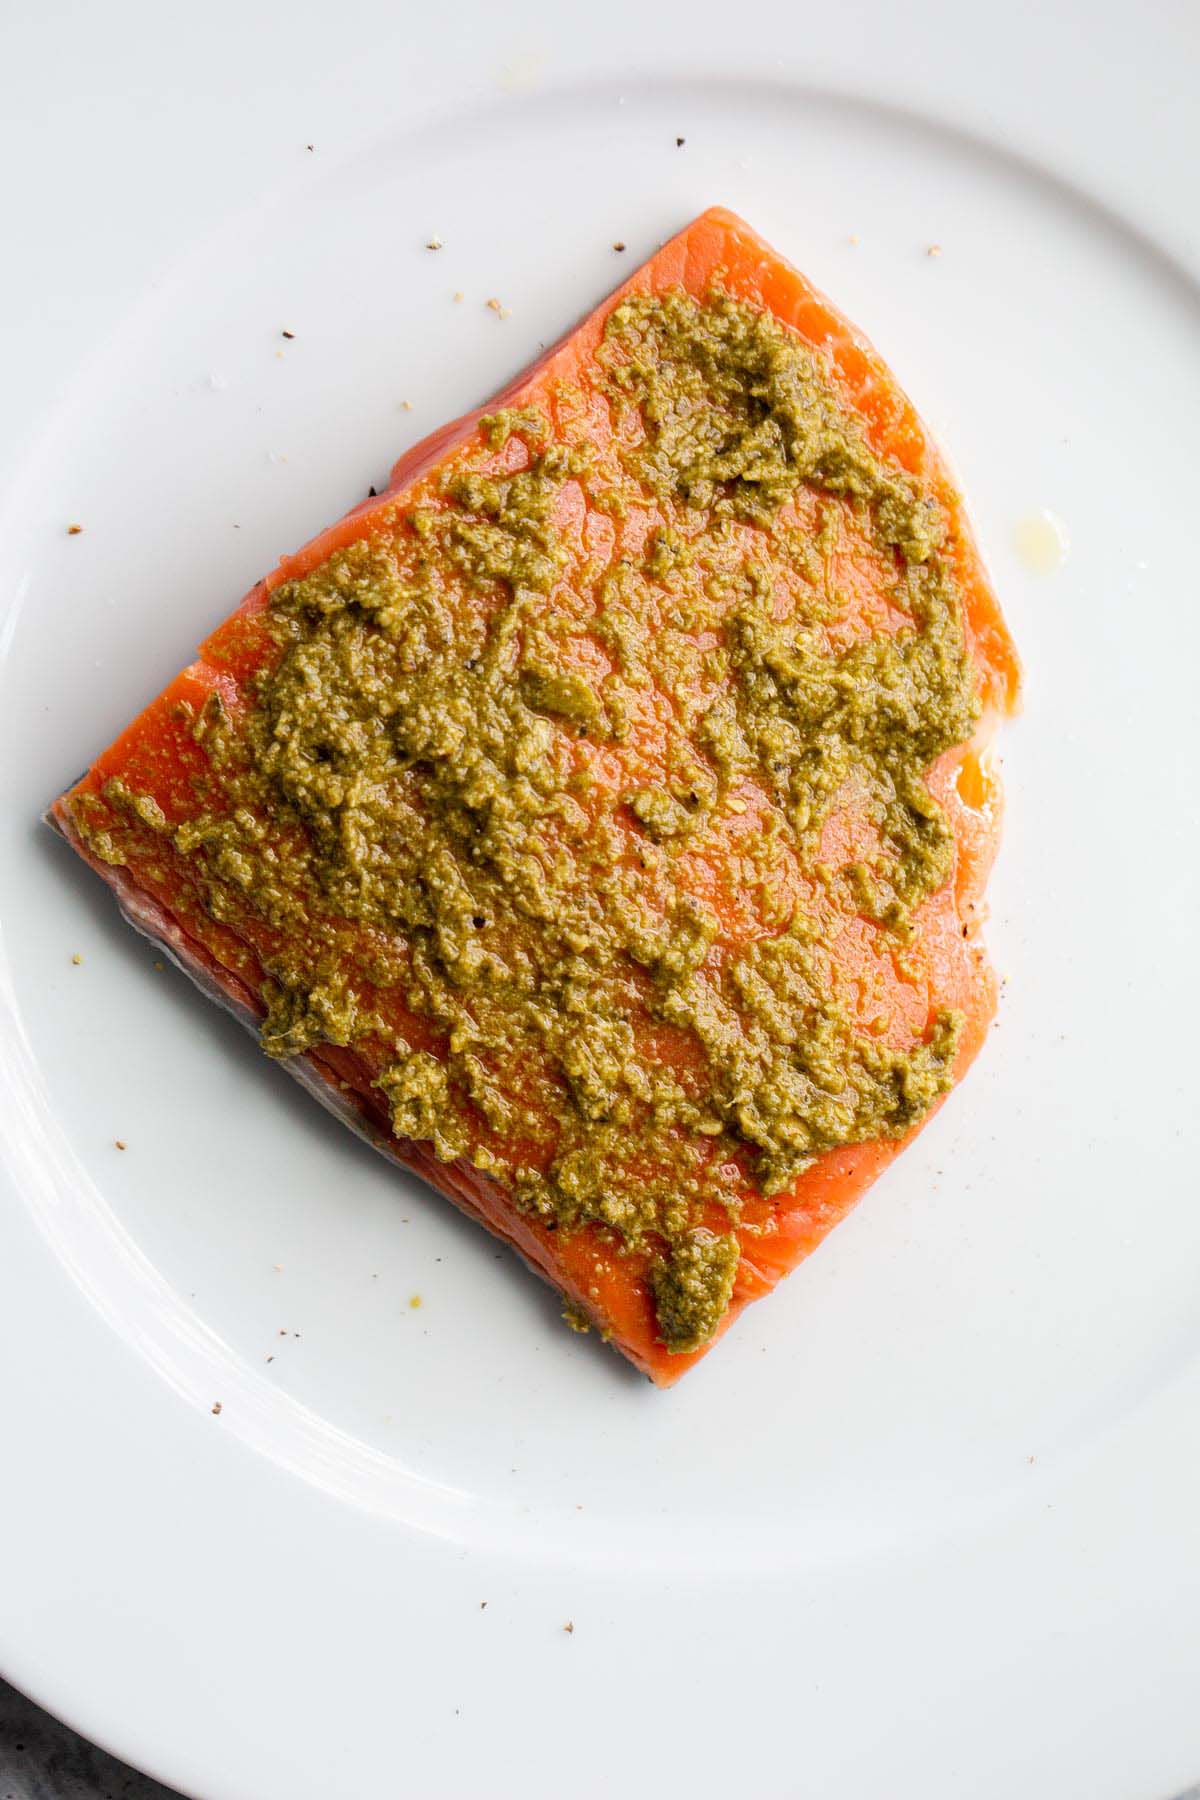 Uncooked salmon on white plate with pesto sauce on top.